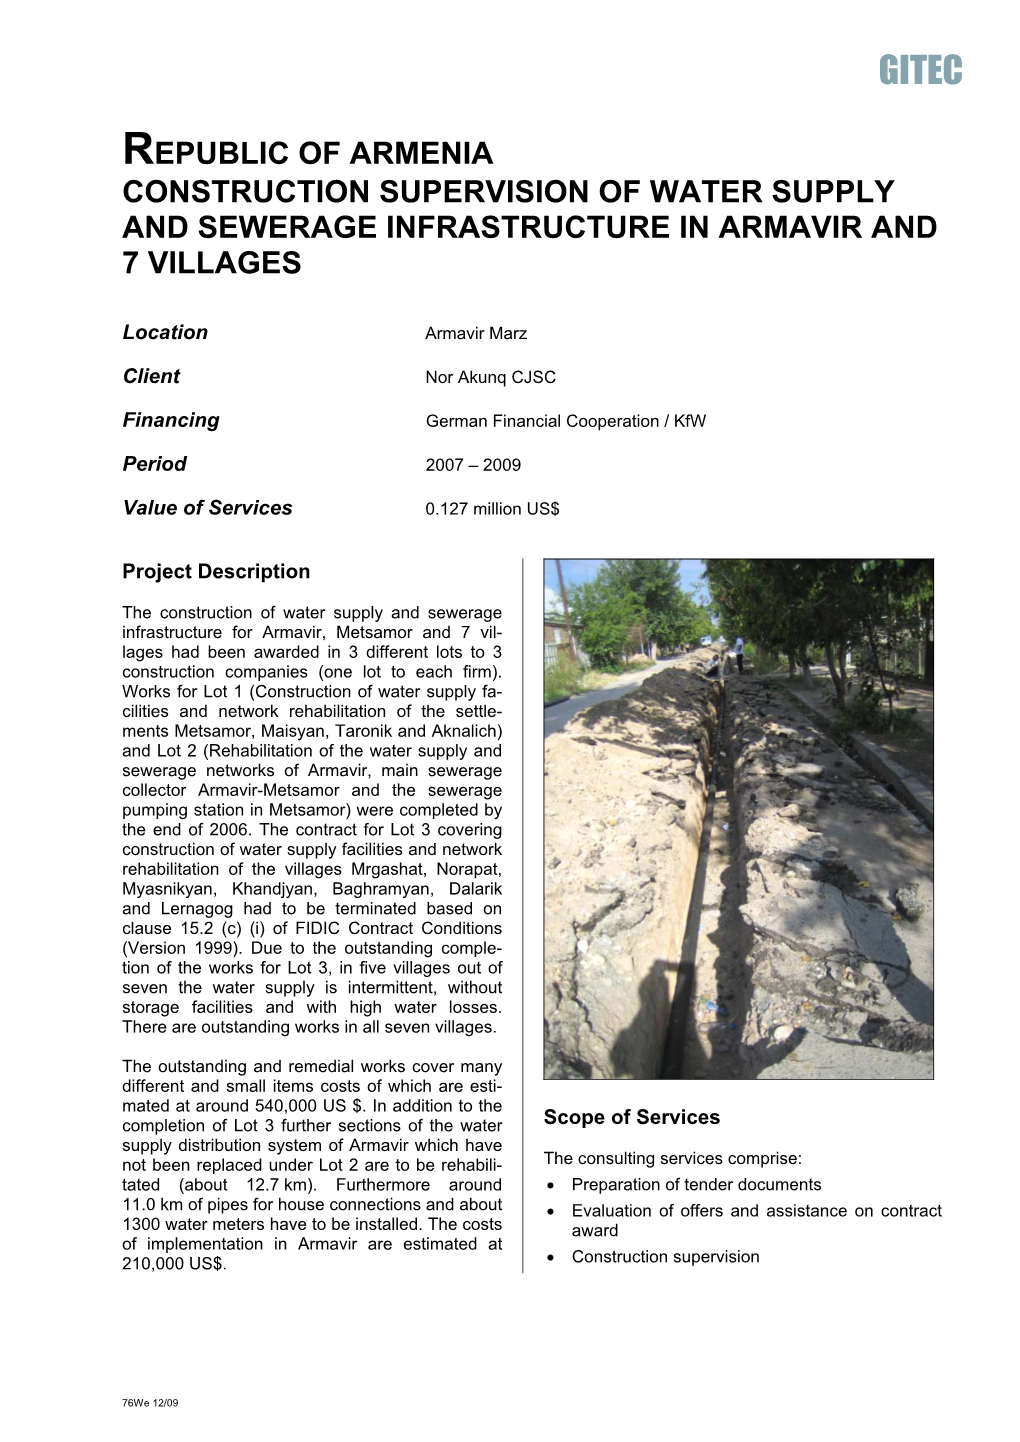 Republic of Armenia Construction Supervision of Water Supply and Sewerage Infrastructure in Armavir and 7 Villages